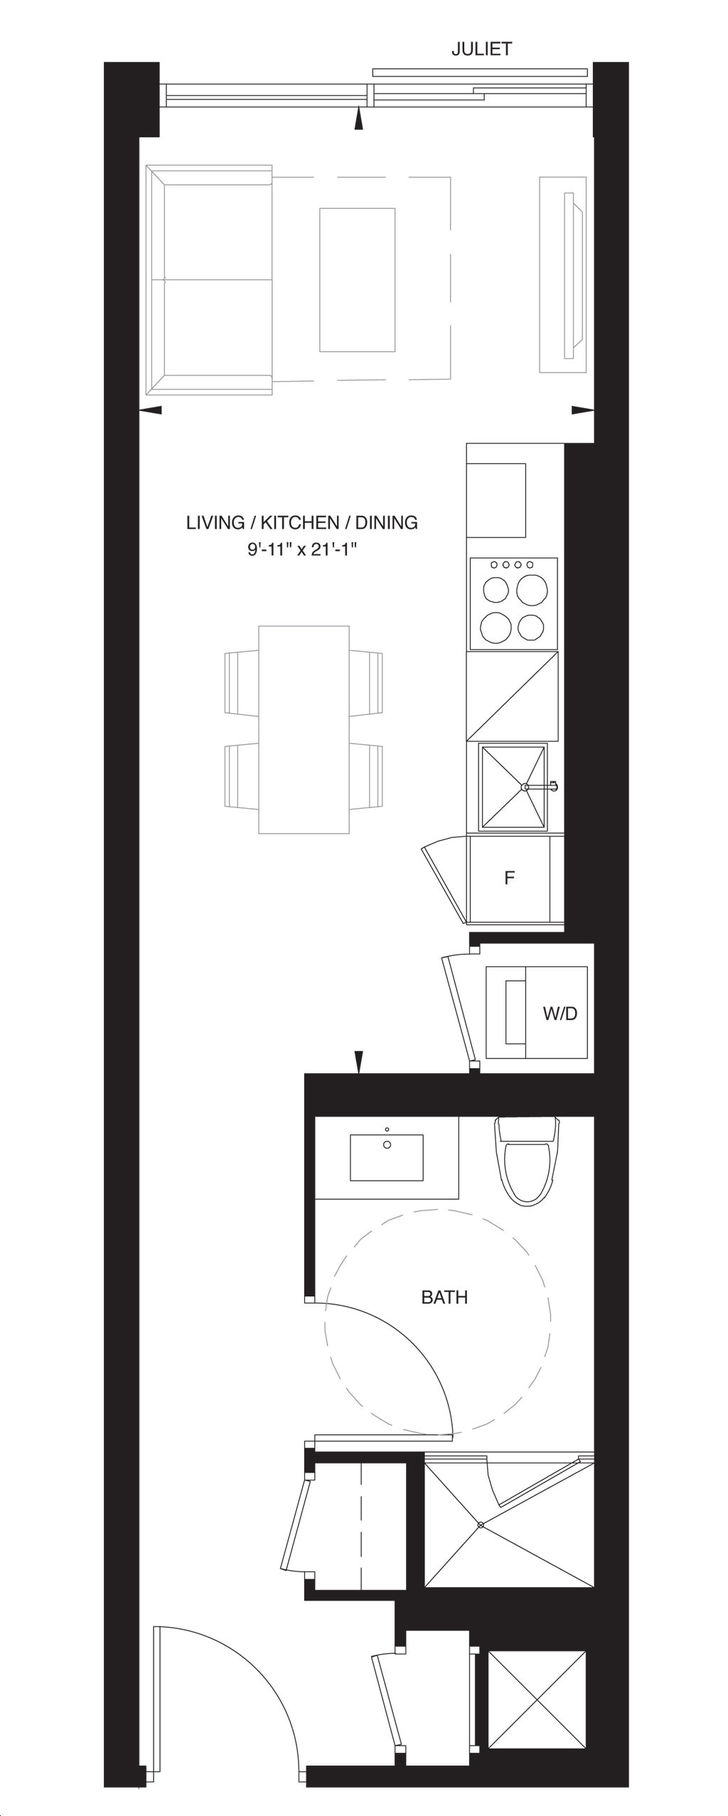 The Forest Hill Condos by CentreCourt Unit SC Floorplan